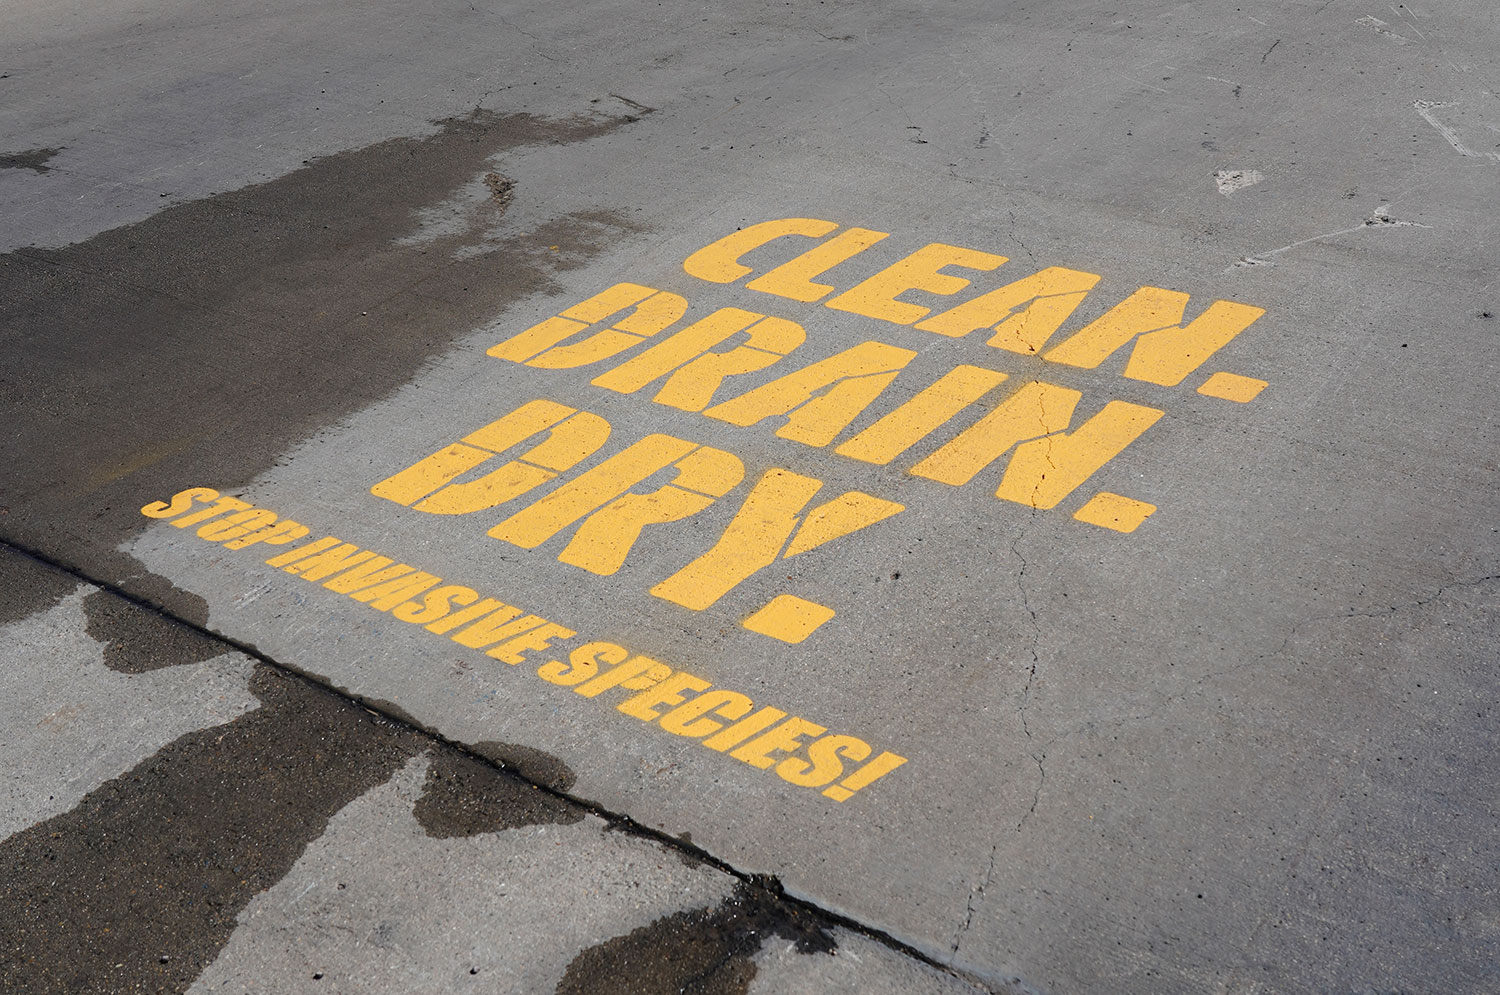 Clean, Drain and Dry written on boat ramp